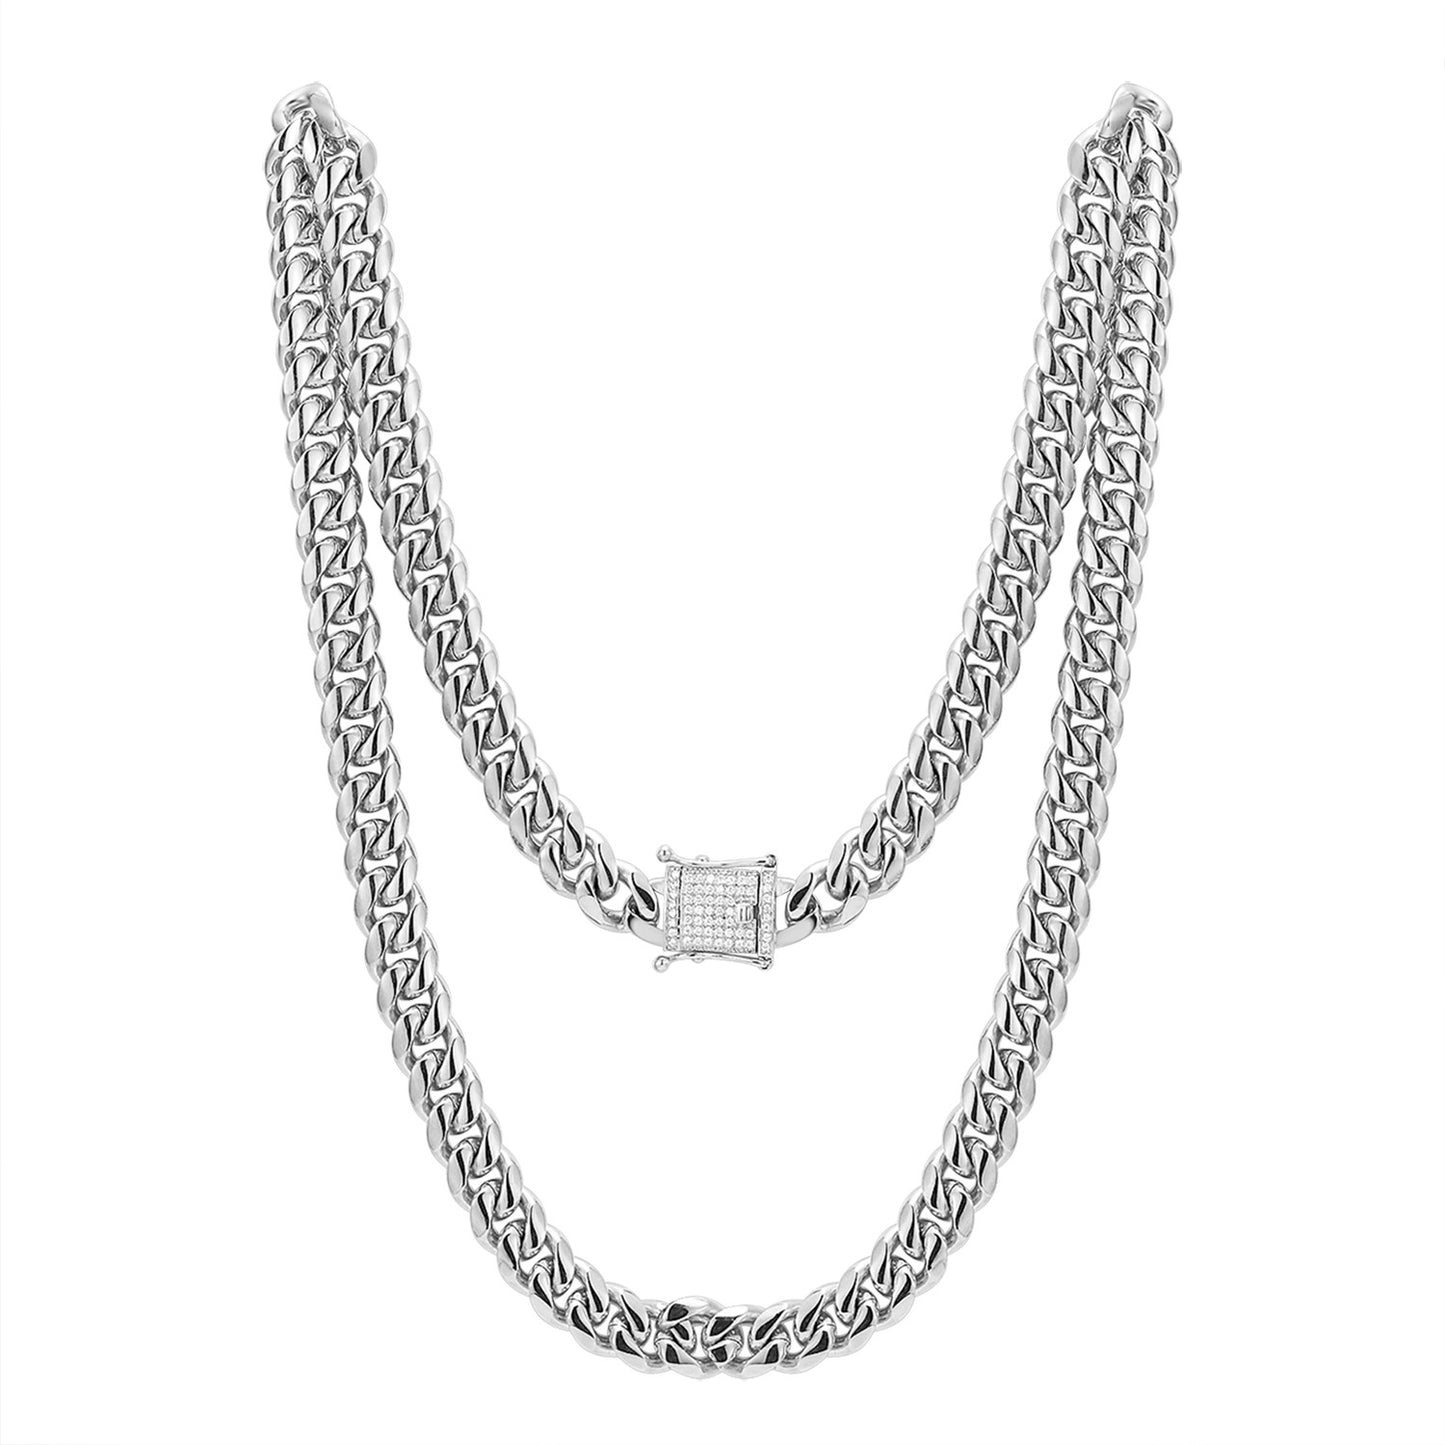 Stainless Steel 12mm Miami Cuban Link 14k White Gold Finish Chain 24" Designer out new Lock